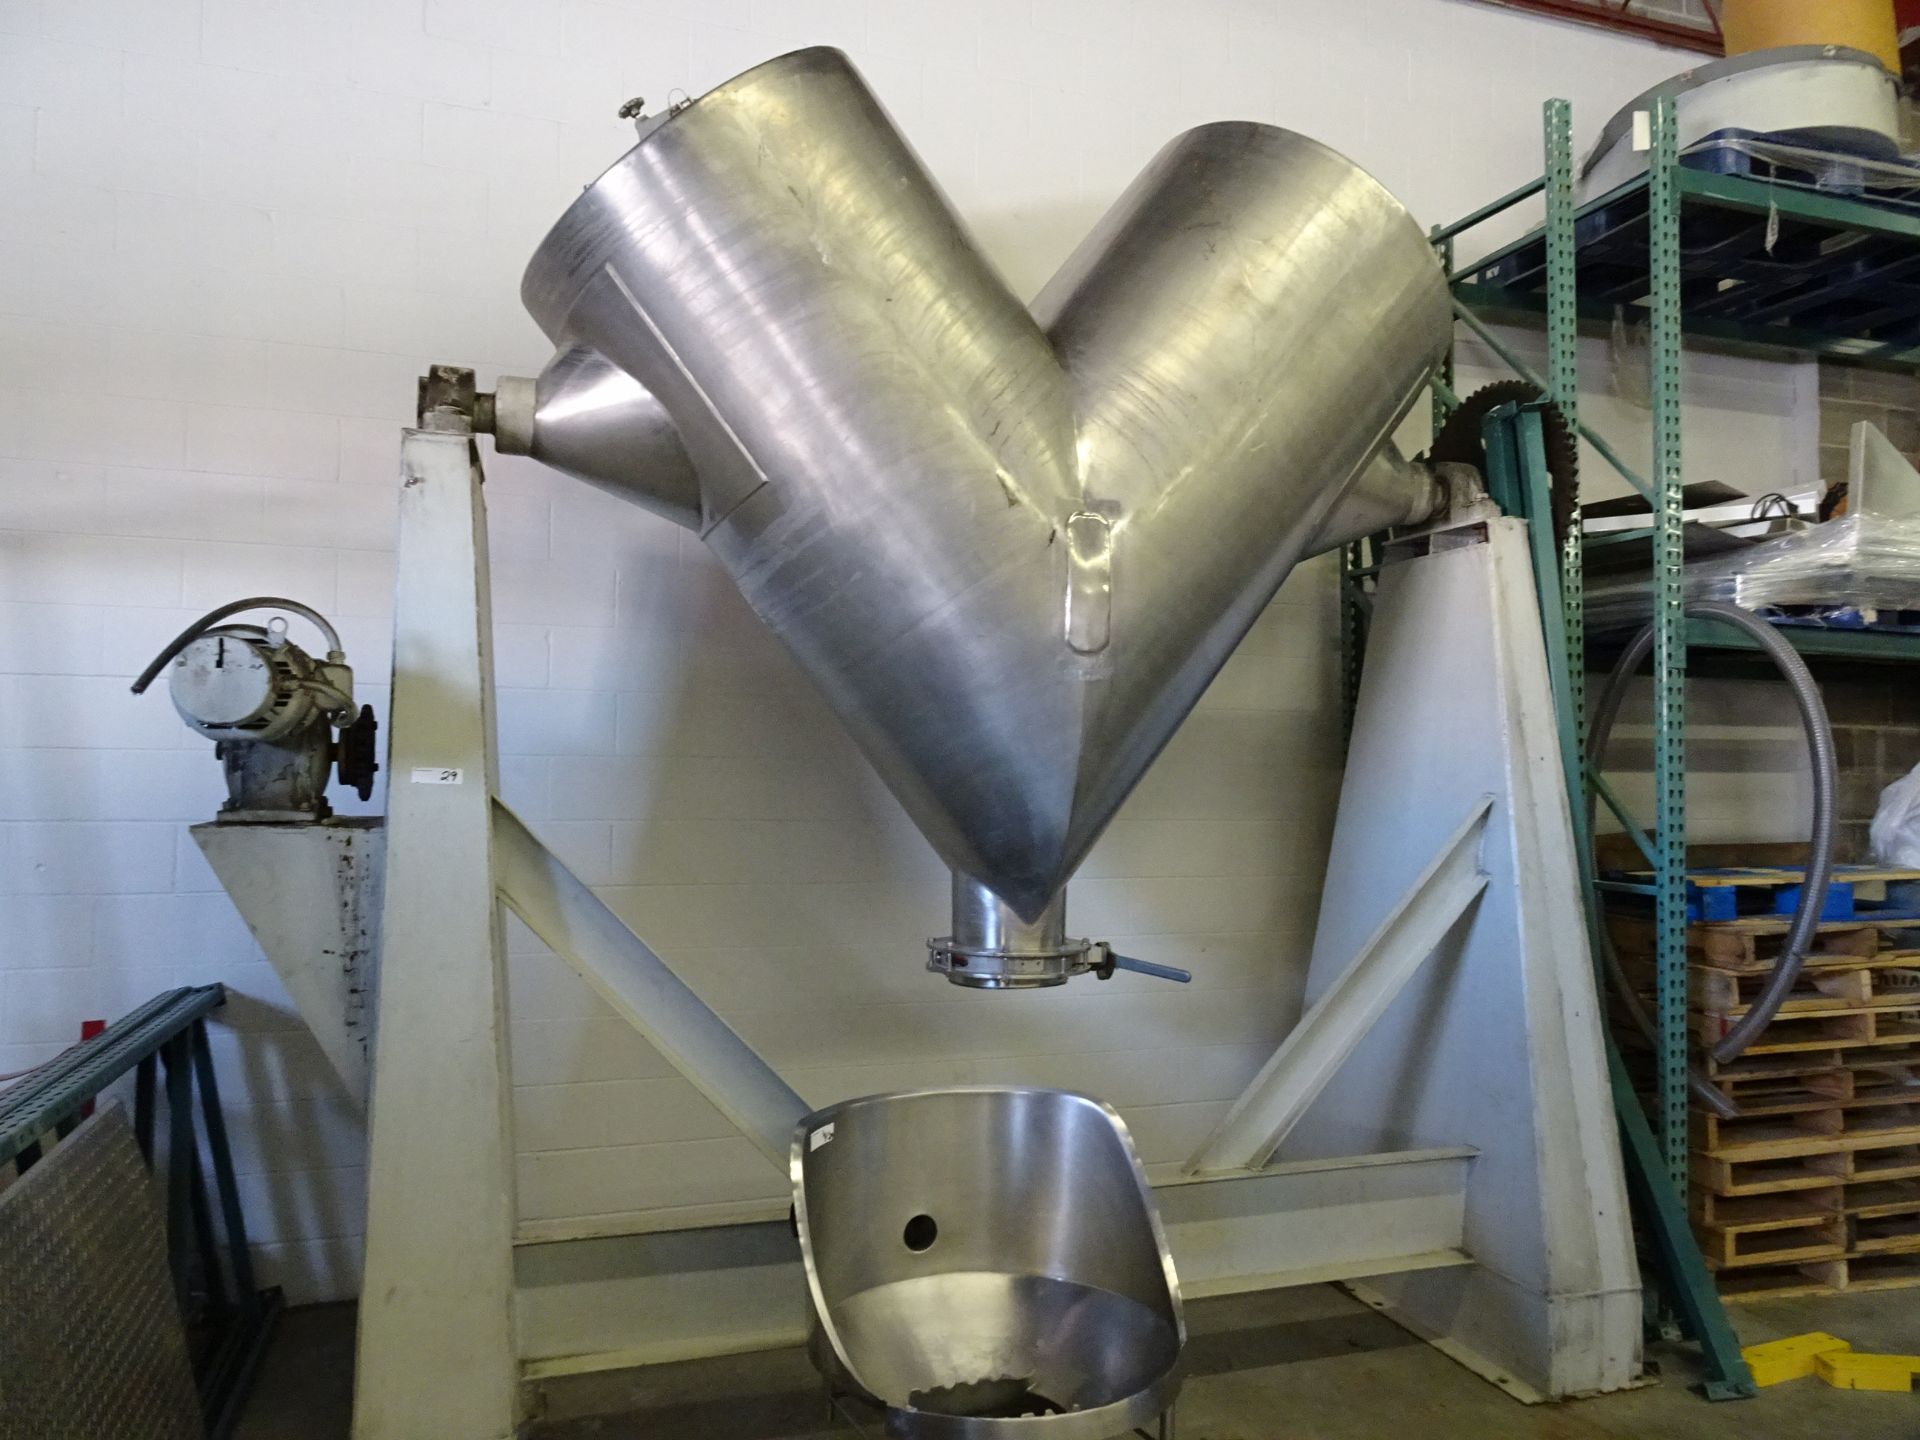 Approximately 50 Cubic Foot V-Shaped Vertical Blender. Please Note Disassembled To Bring Into - Image 2 of 6